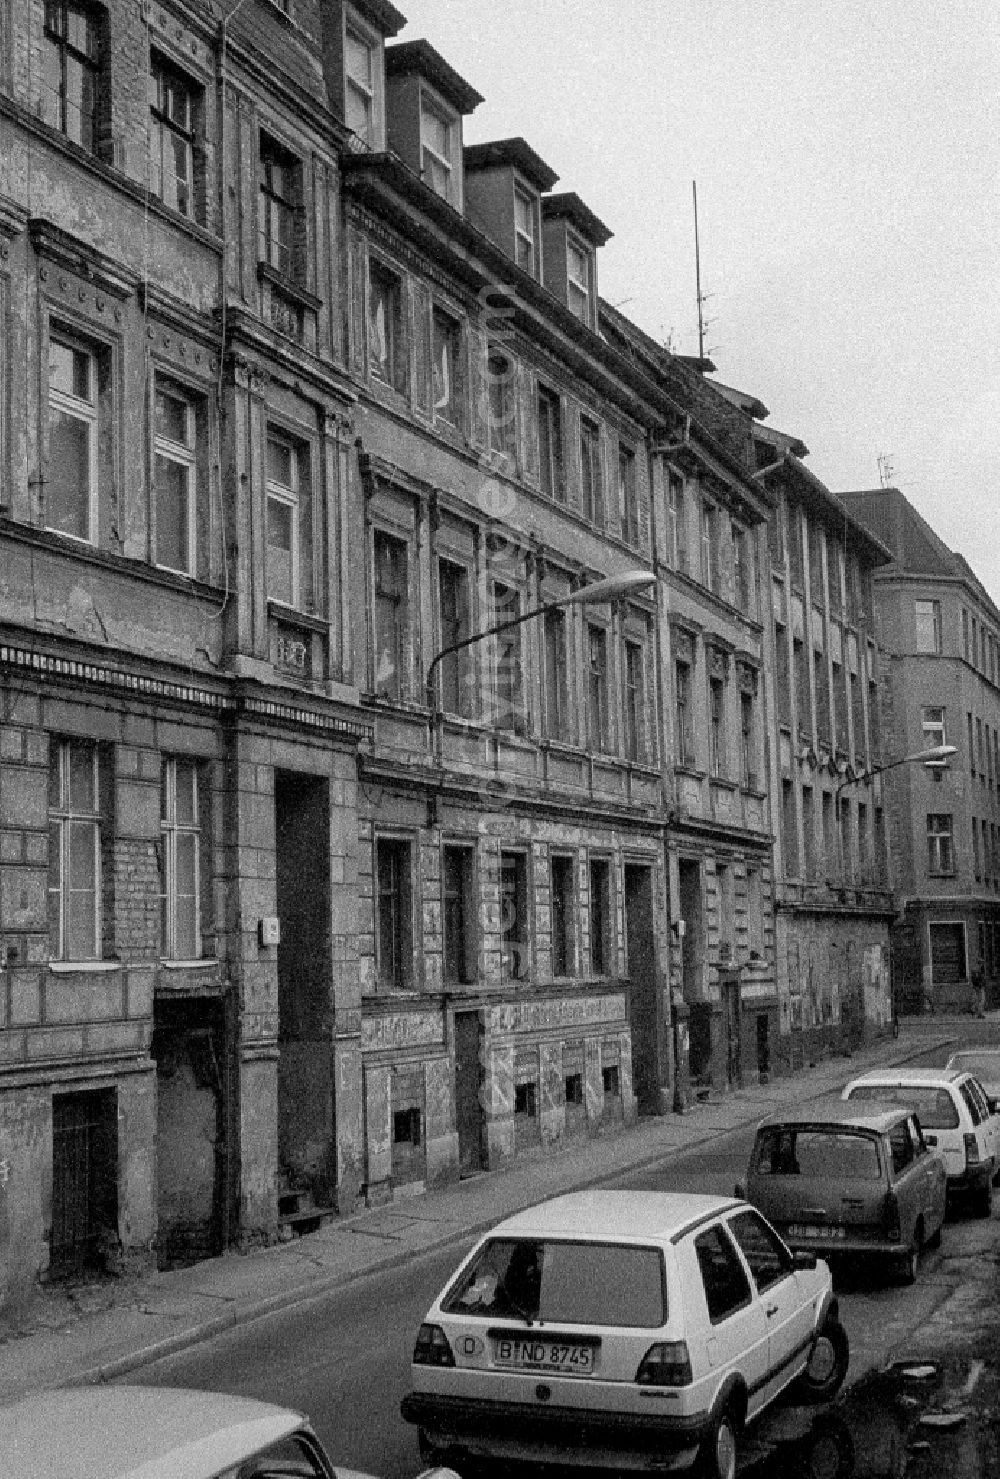 GDR image archive: Berlin - Facades of an old apartment building settlement in the Scheunenviertel on Steinstrasse in the Mitte district of Berlin East Berlin in the area of the former GDR, German Democratic Republic